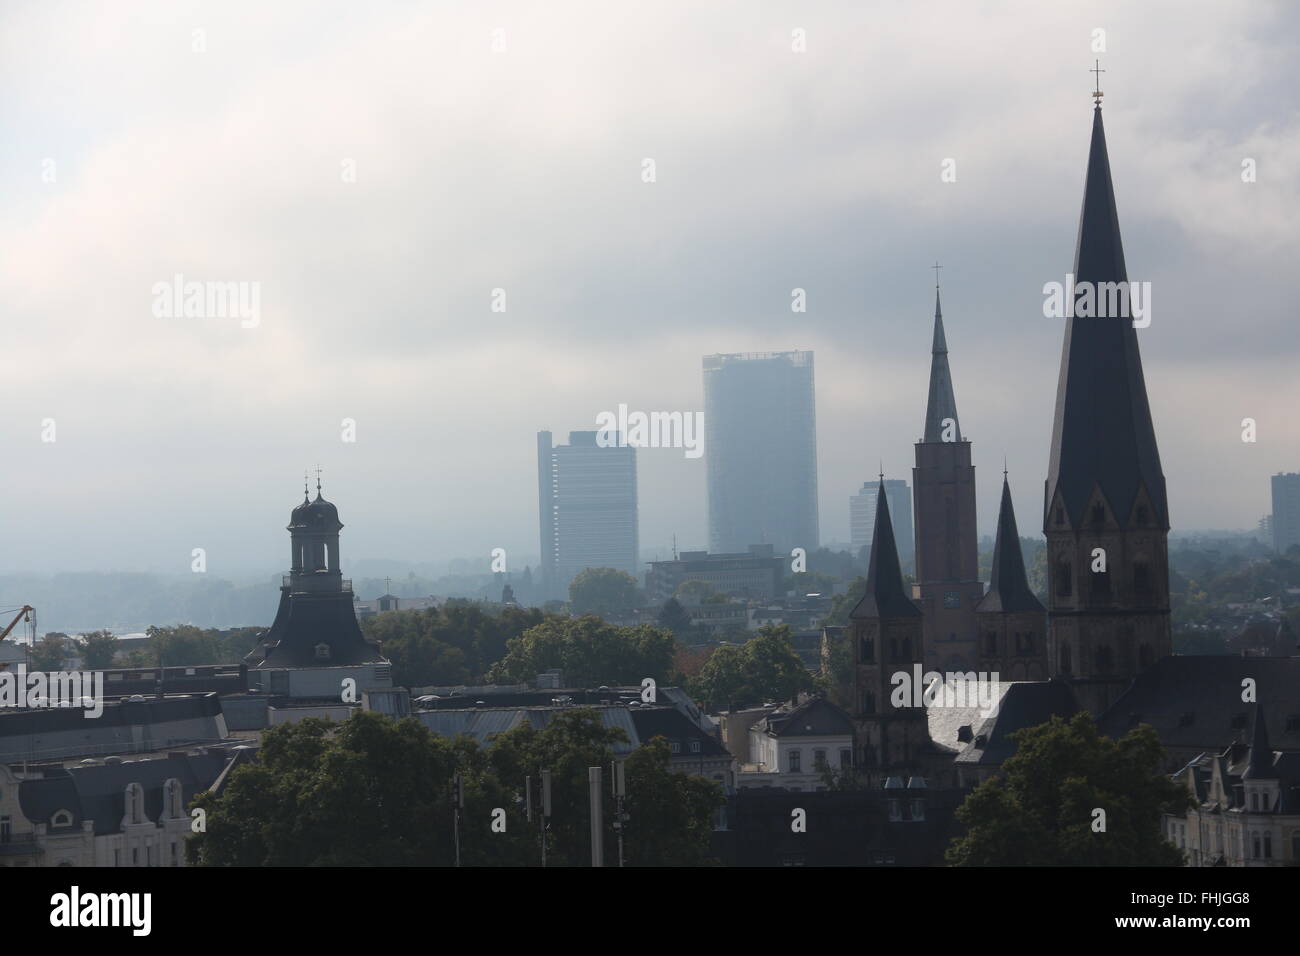 Skyline with UN- and Post Tower in Bonn, Germany Stock Photo